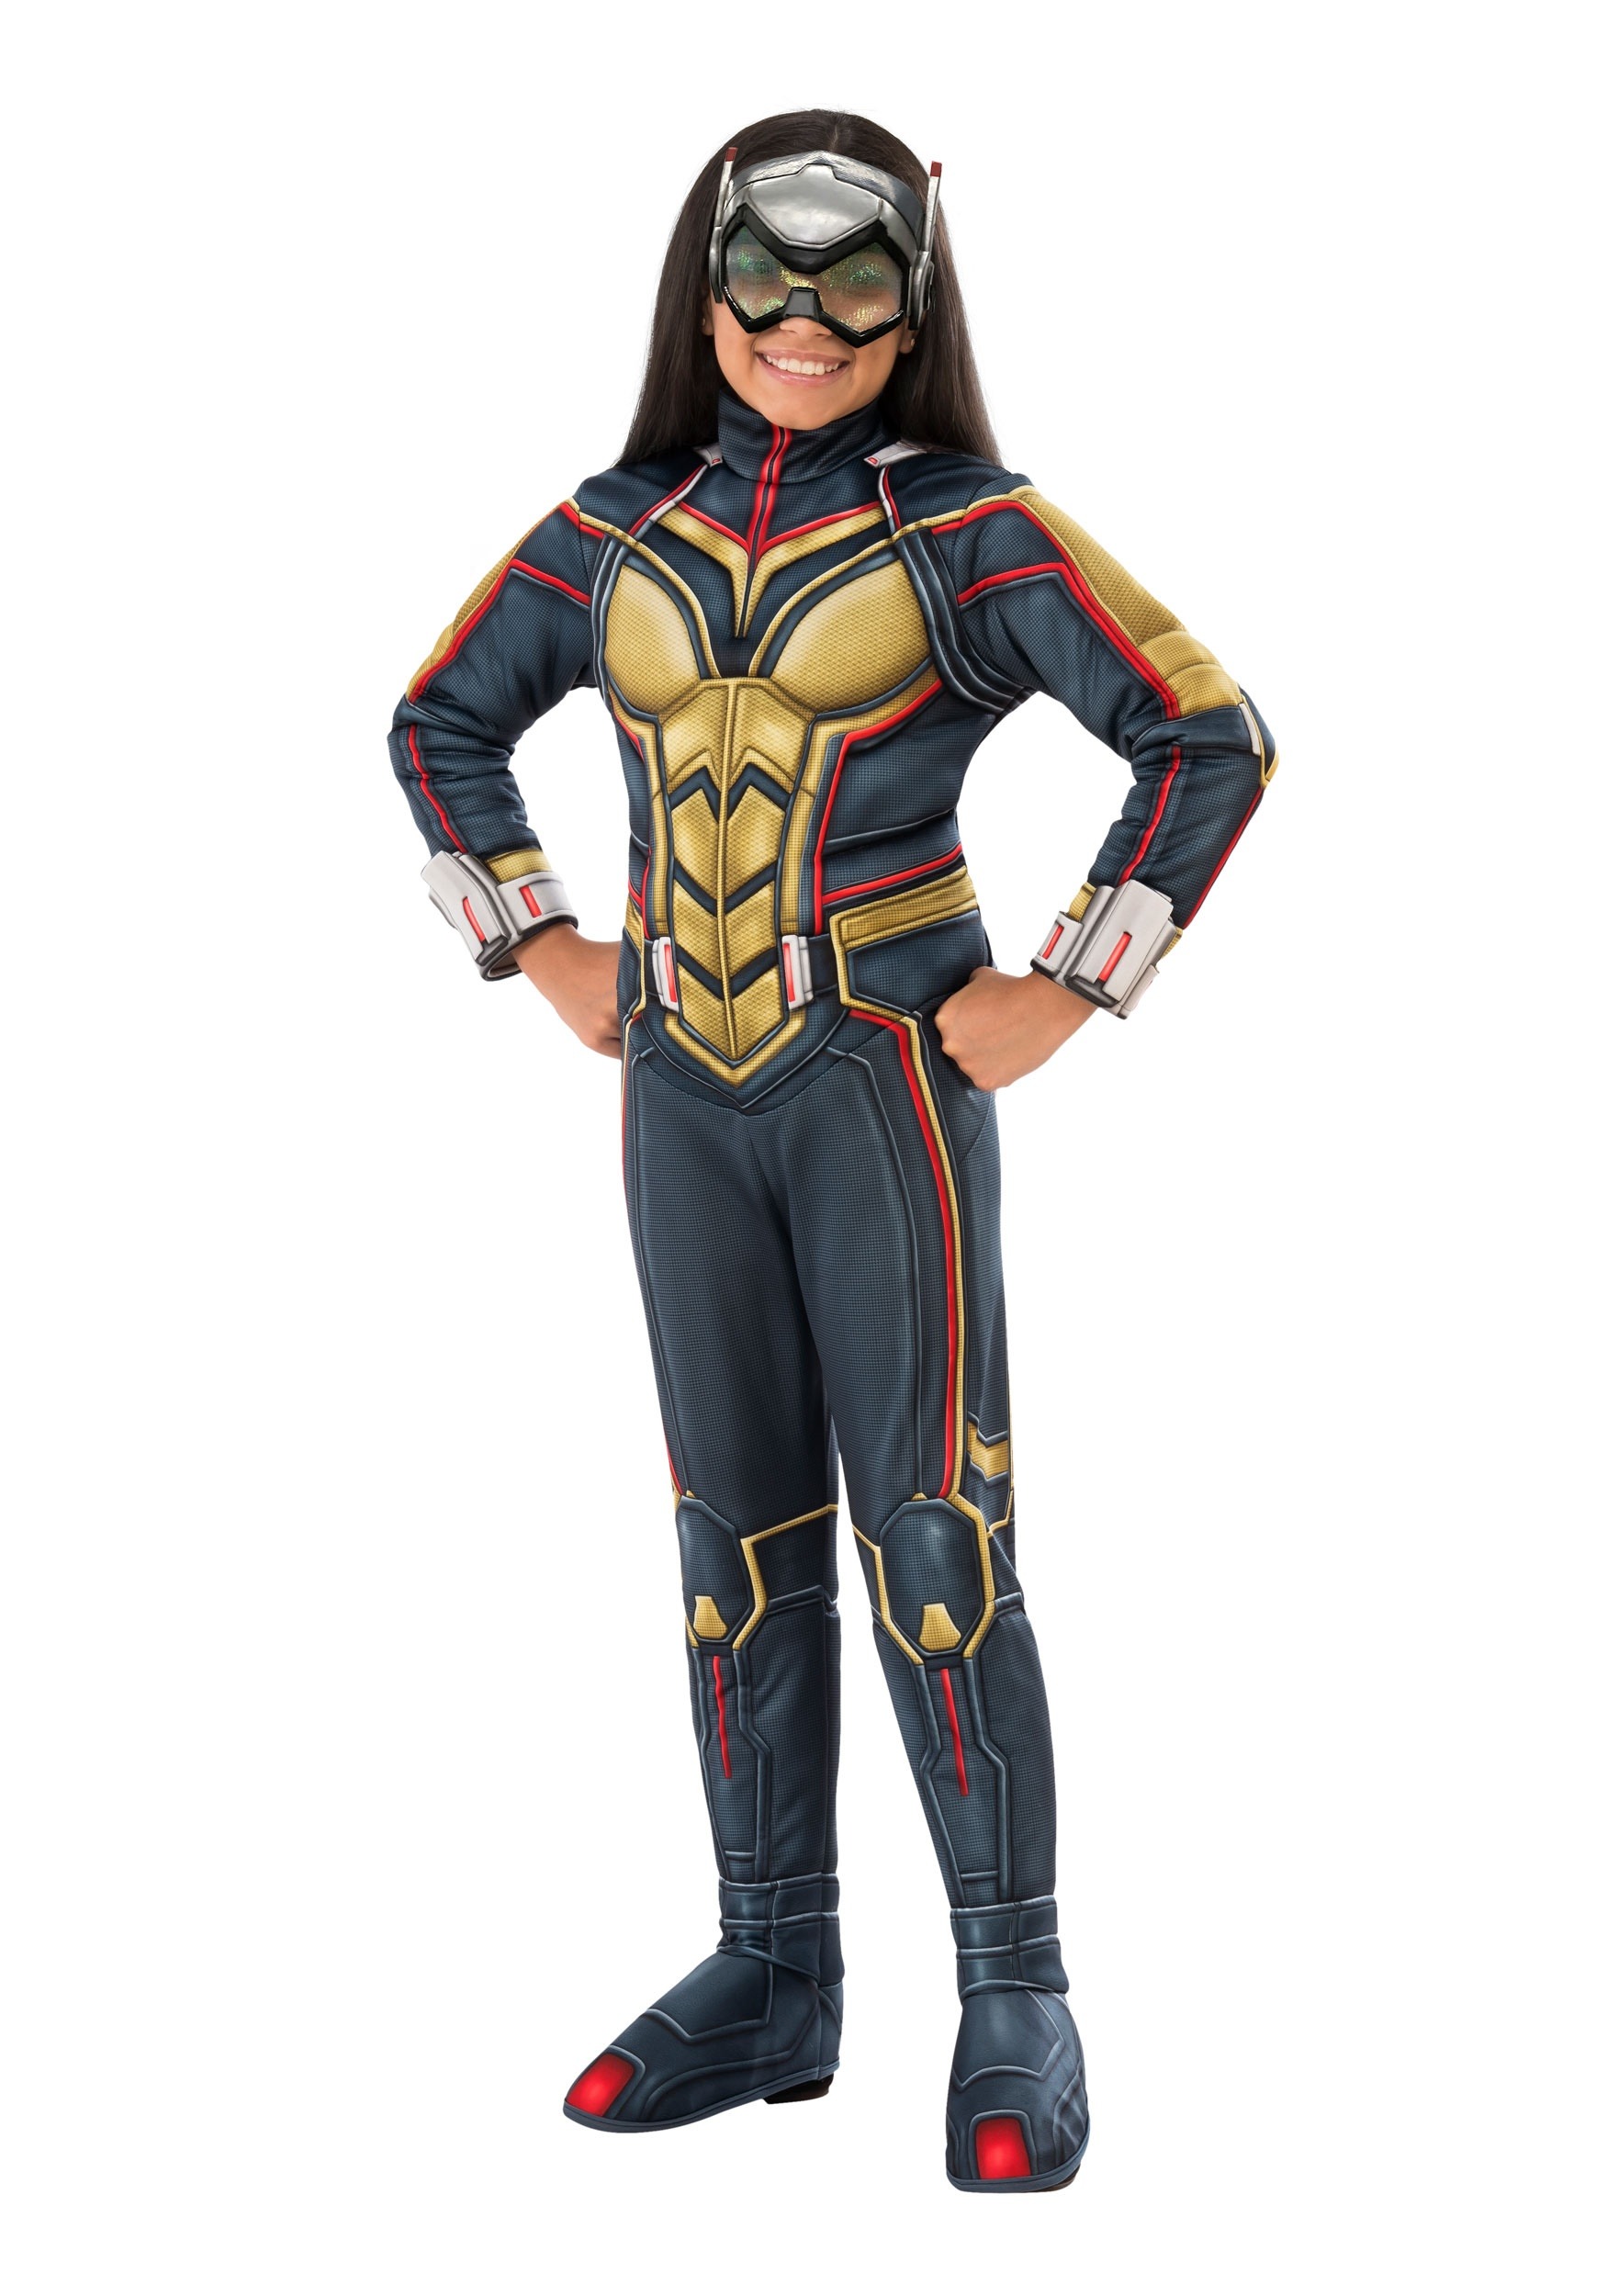 Ant-Man and the Wasp Girl's Wasp Costume